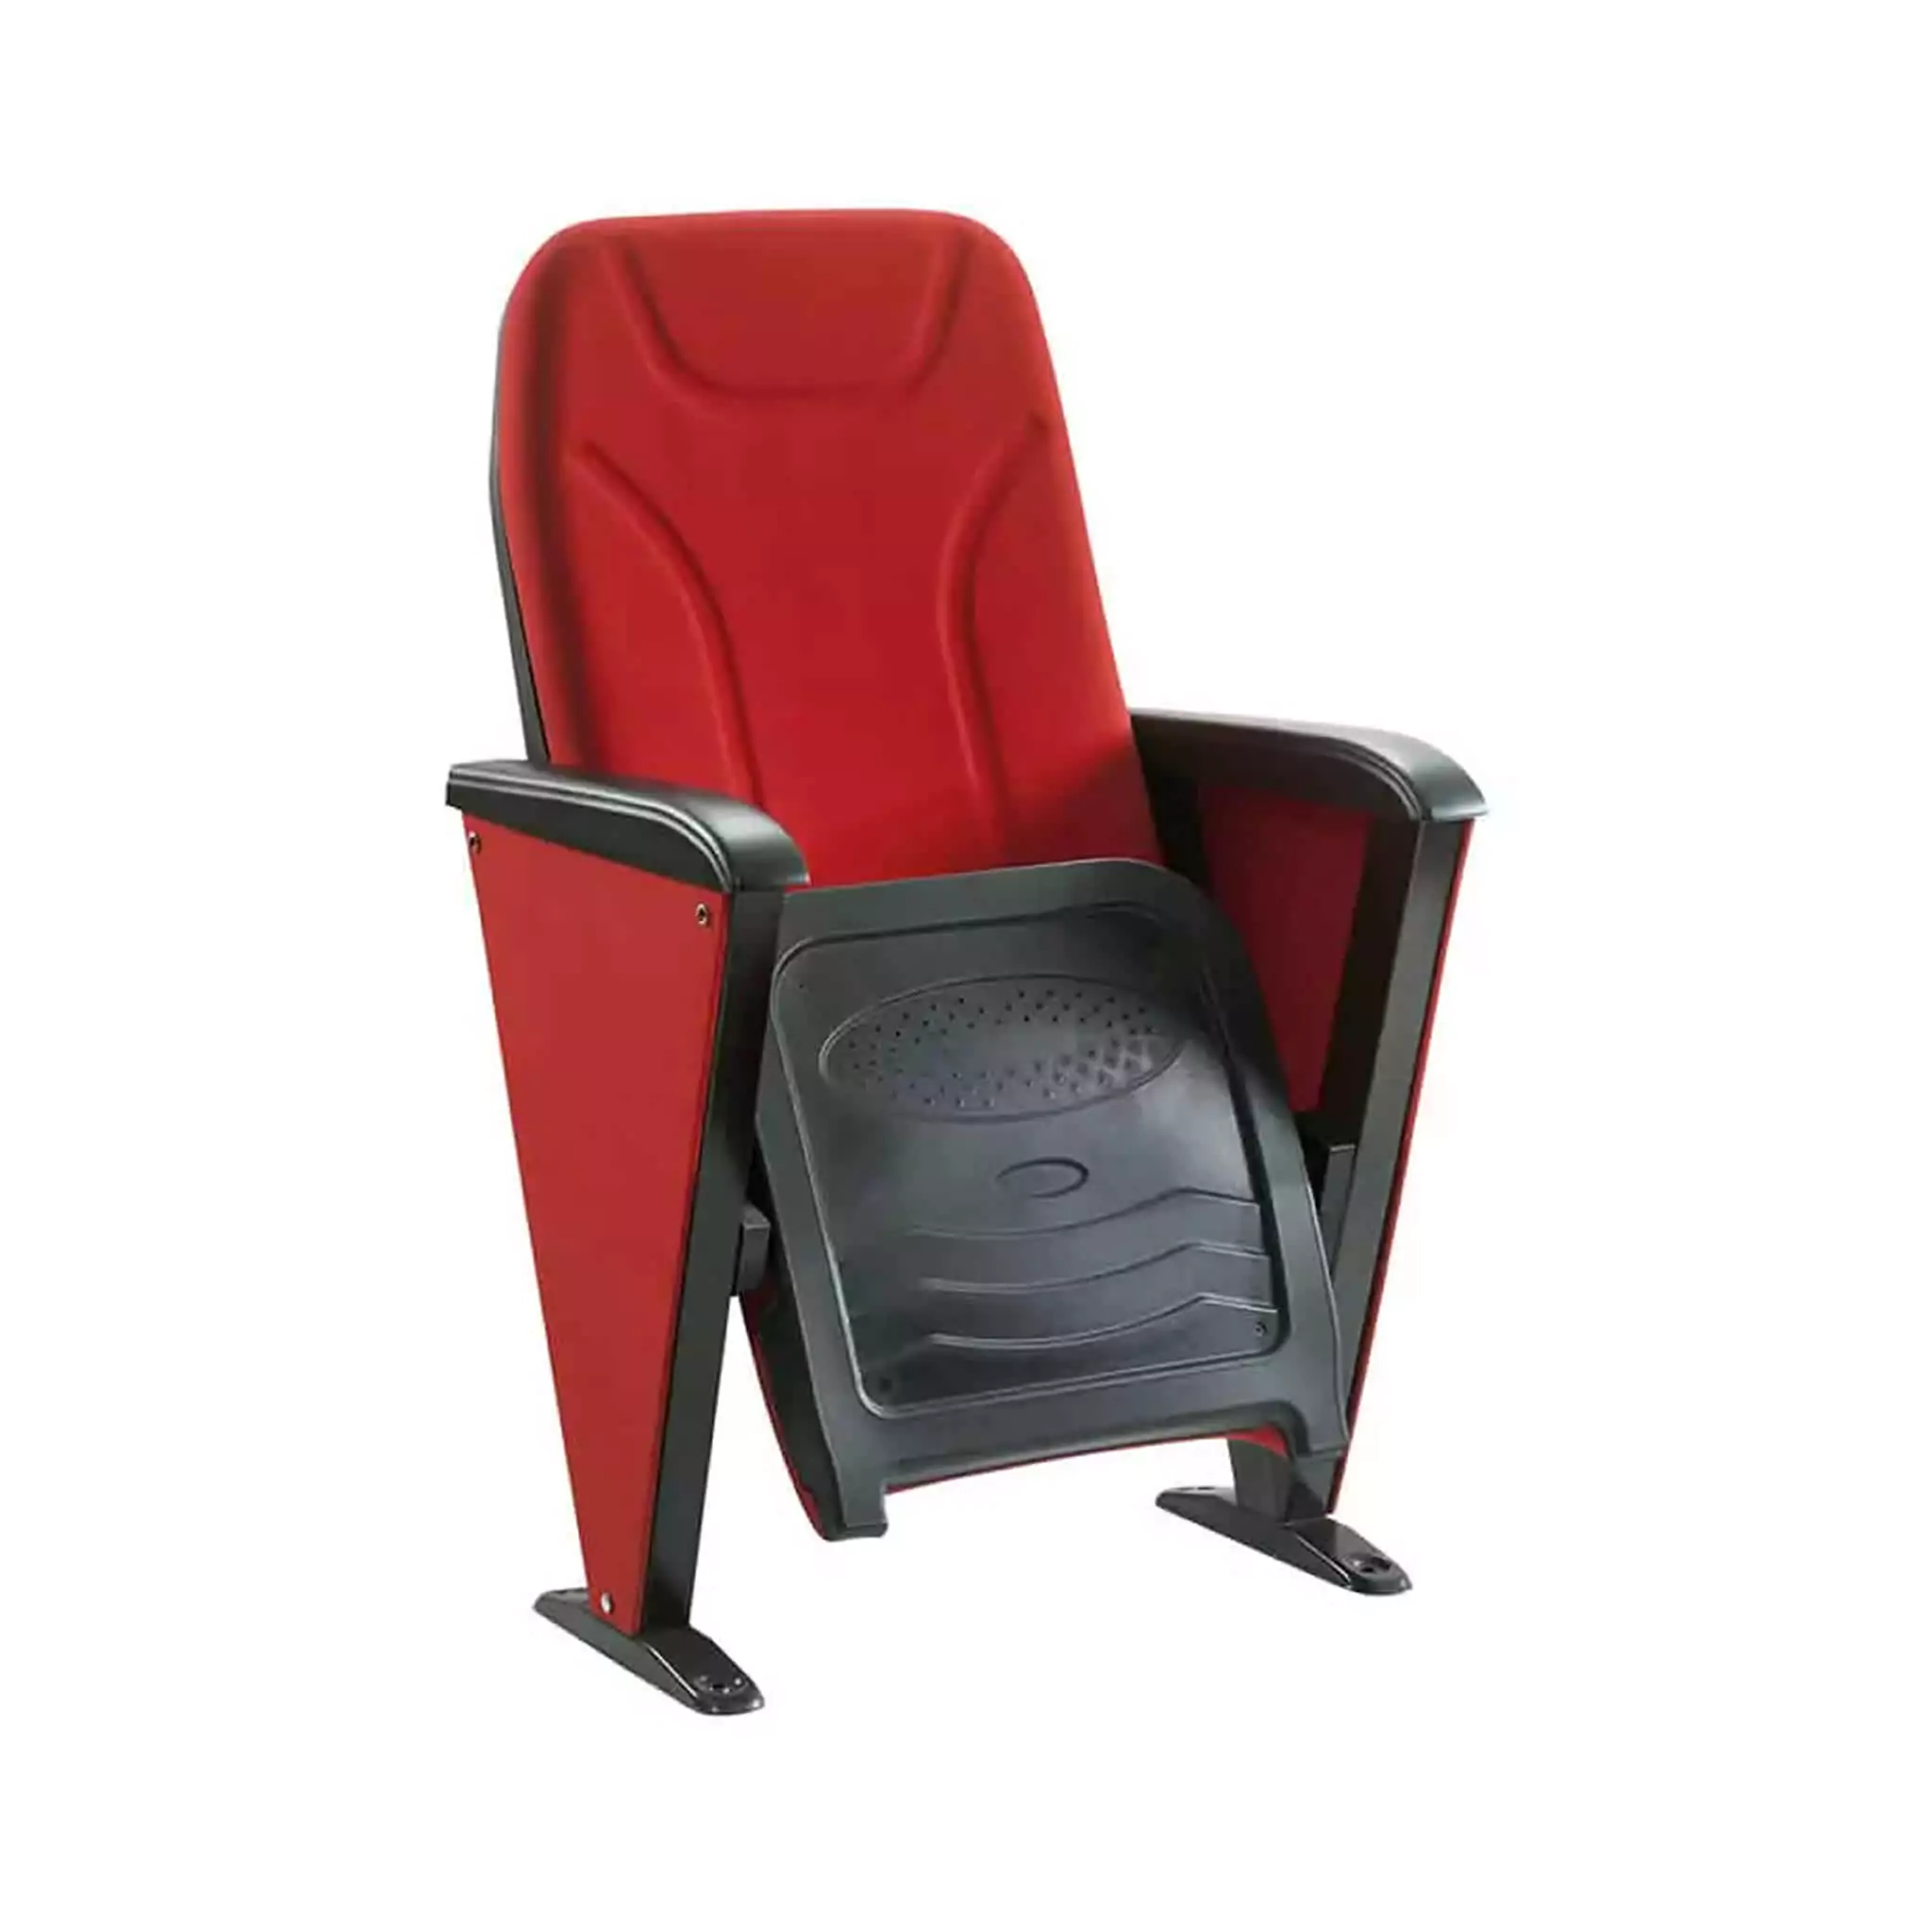 Simko Seating Product Conference Seat Zirkon 02